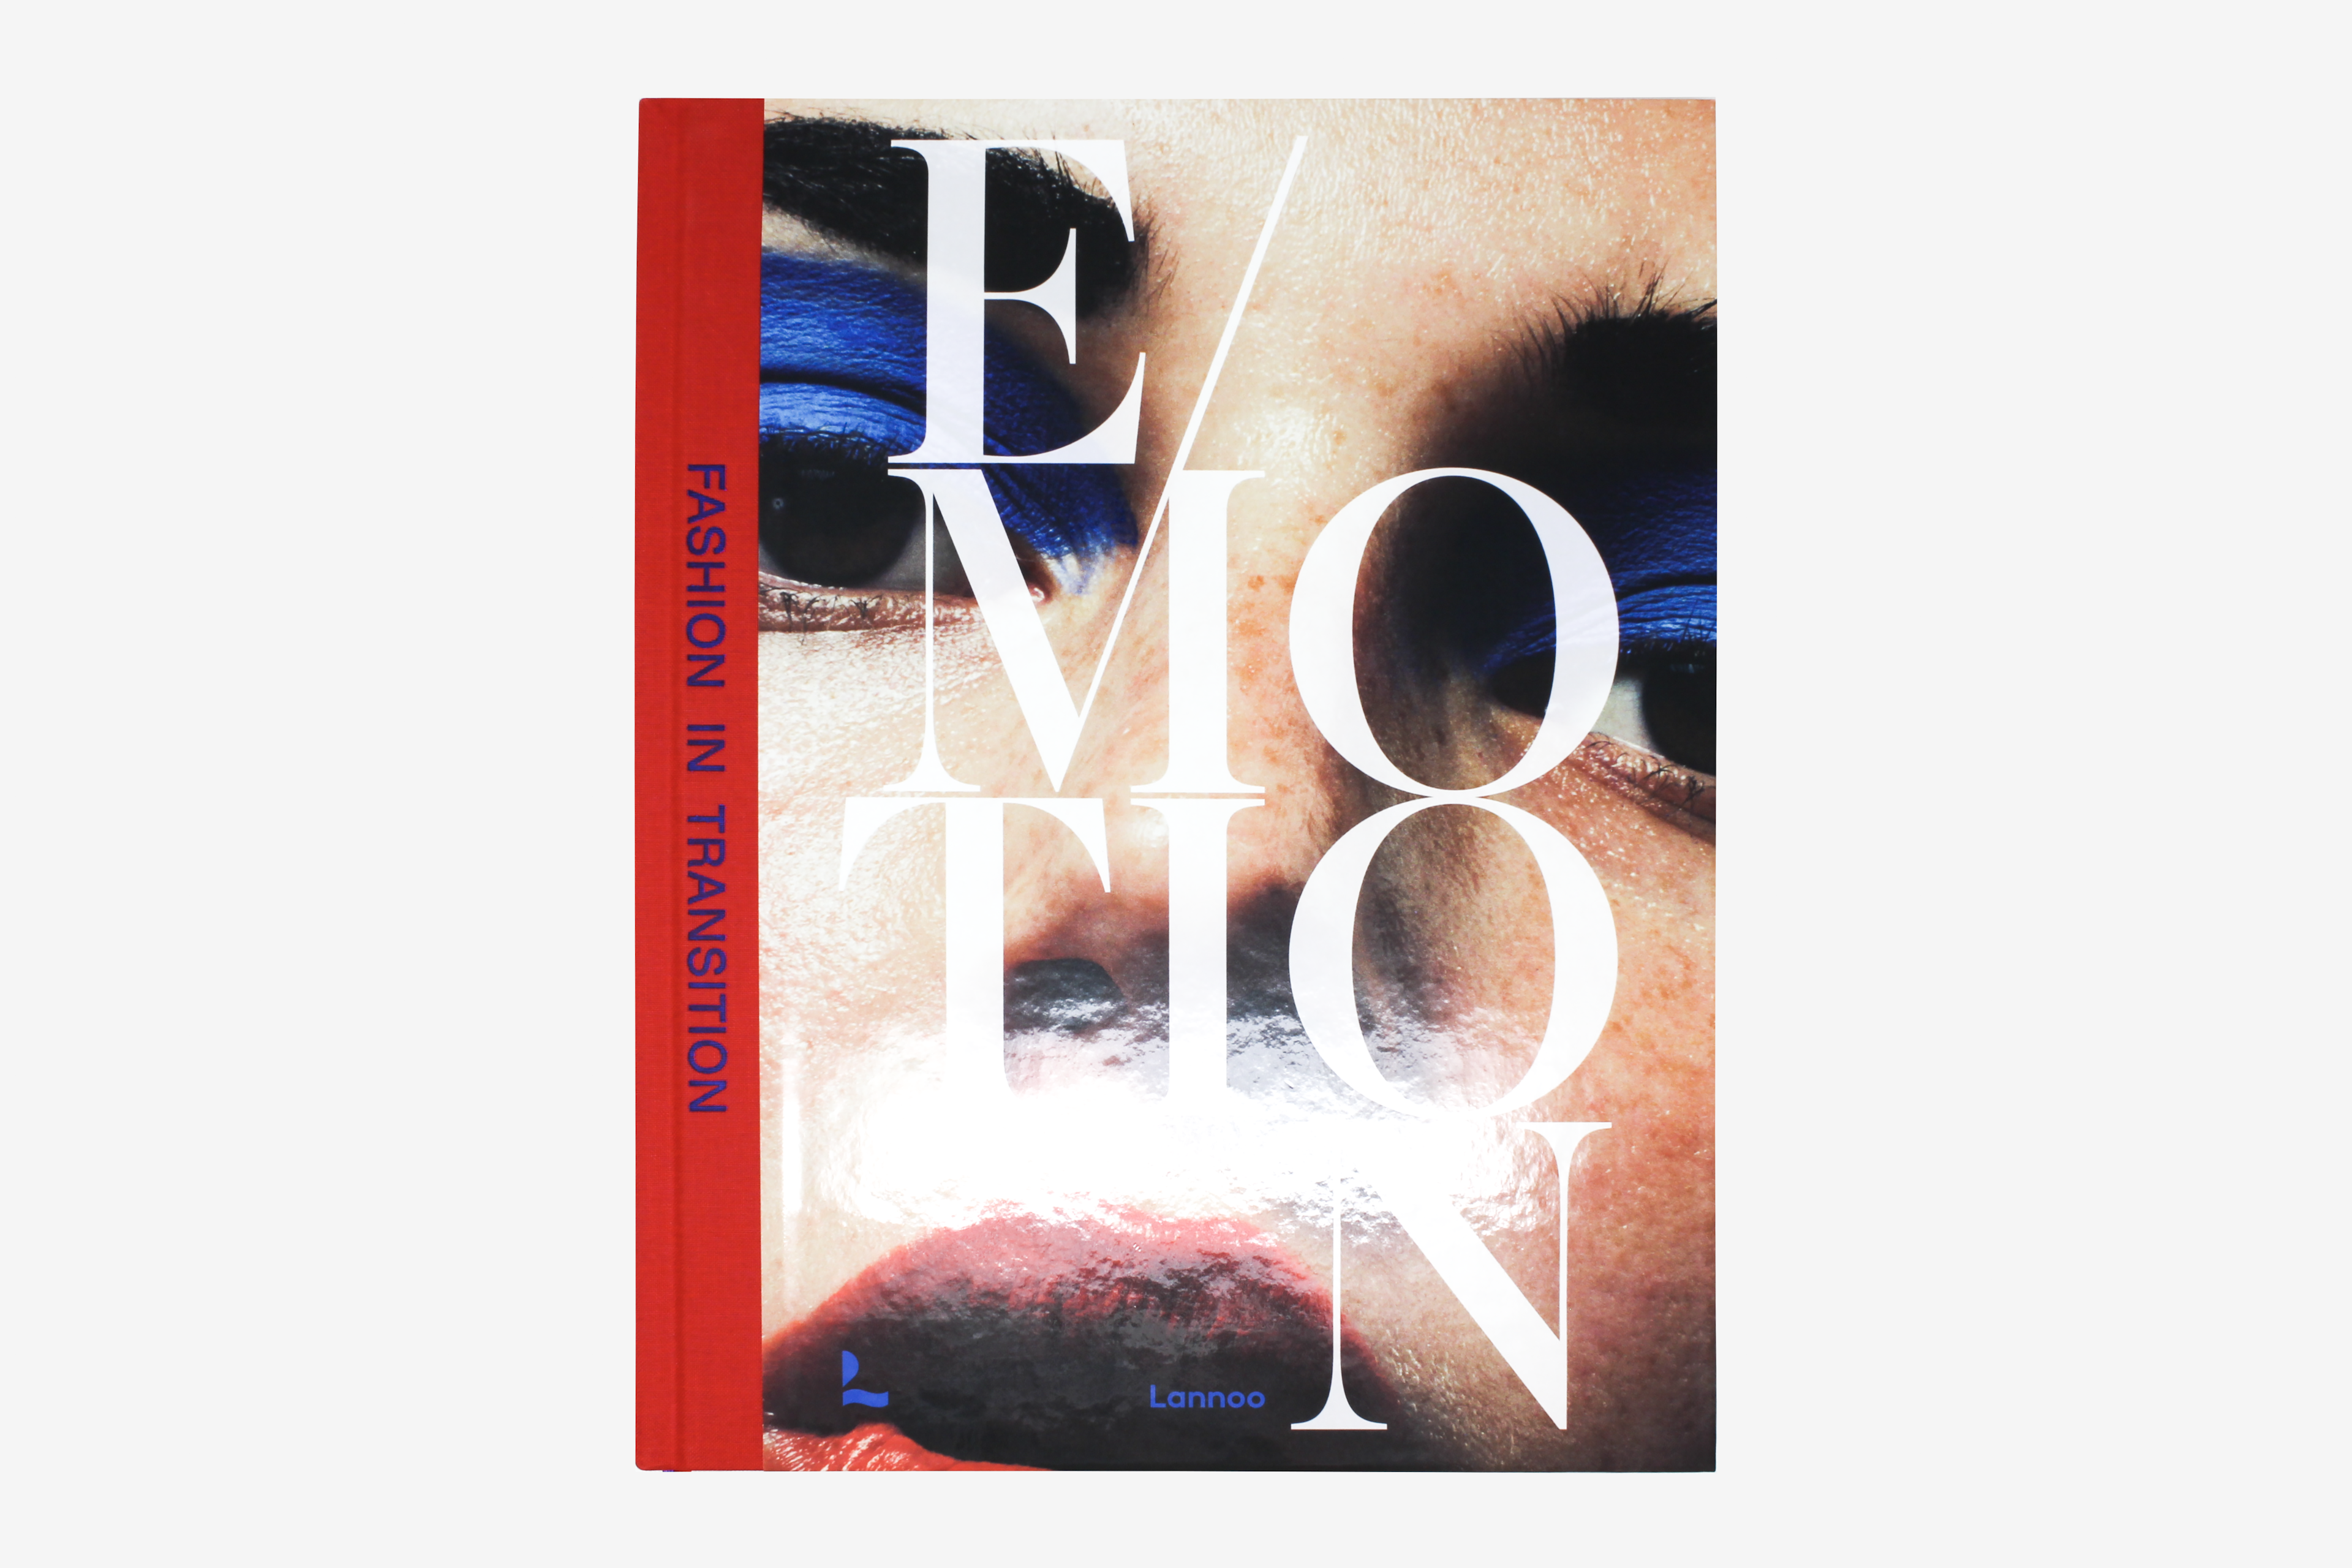 E/Motion: Fashion in Transition